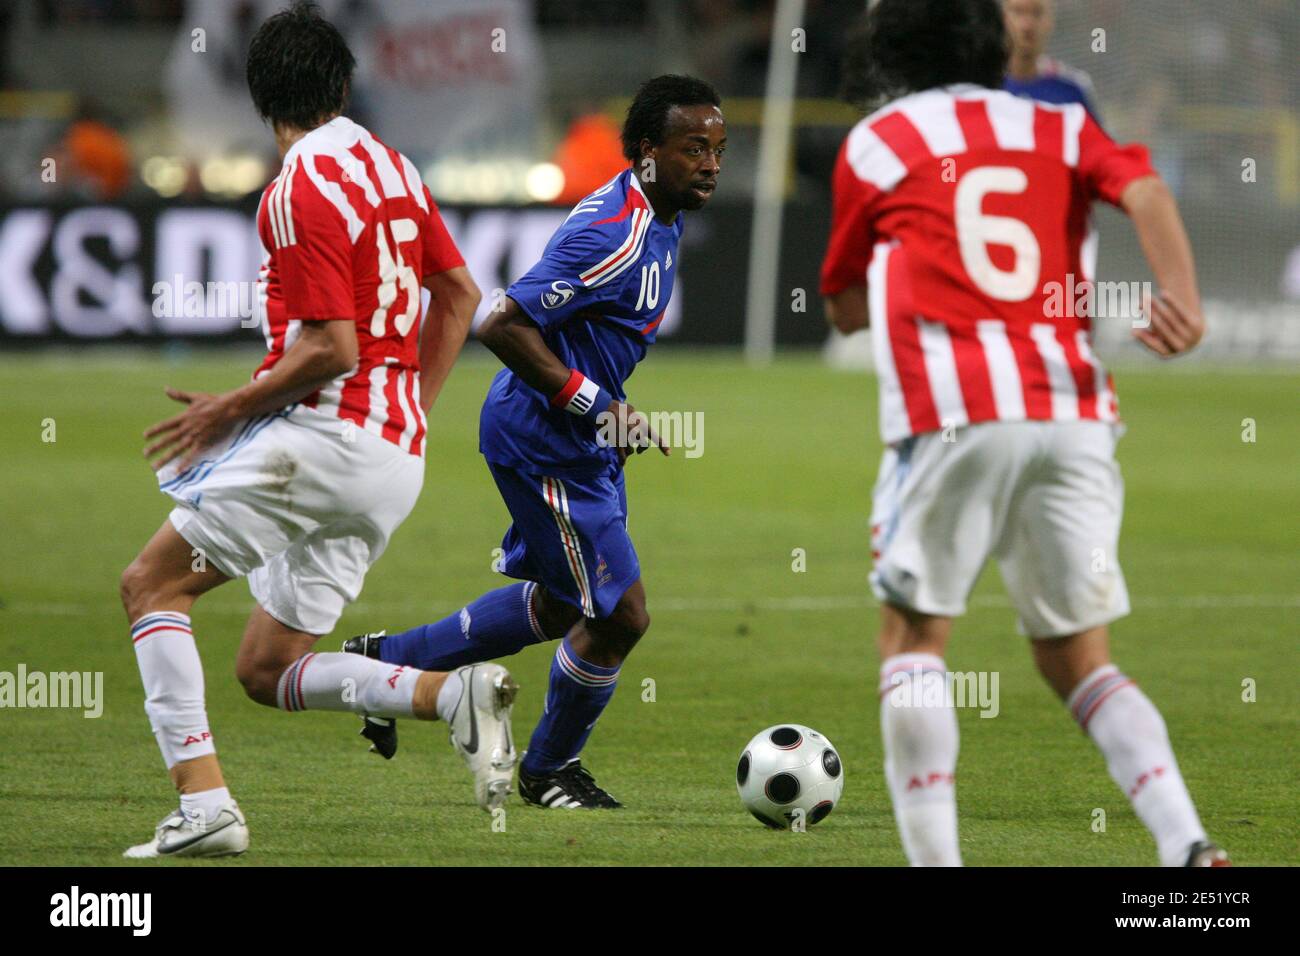 Sidney Govou during the International Friendly Soccer Match, France vs  Paraguay in Toulouse, France on May 31, 2008. The match ended in a resultat  draw. Photo by Alex/Cameleon/ABACAPRESS.COM Stock Photo - Alamy